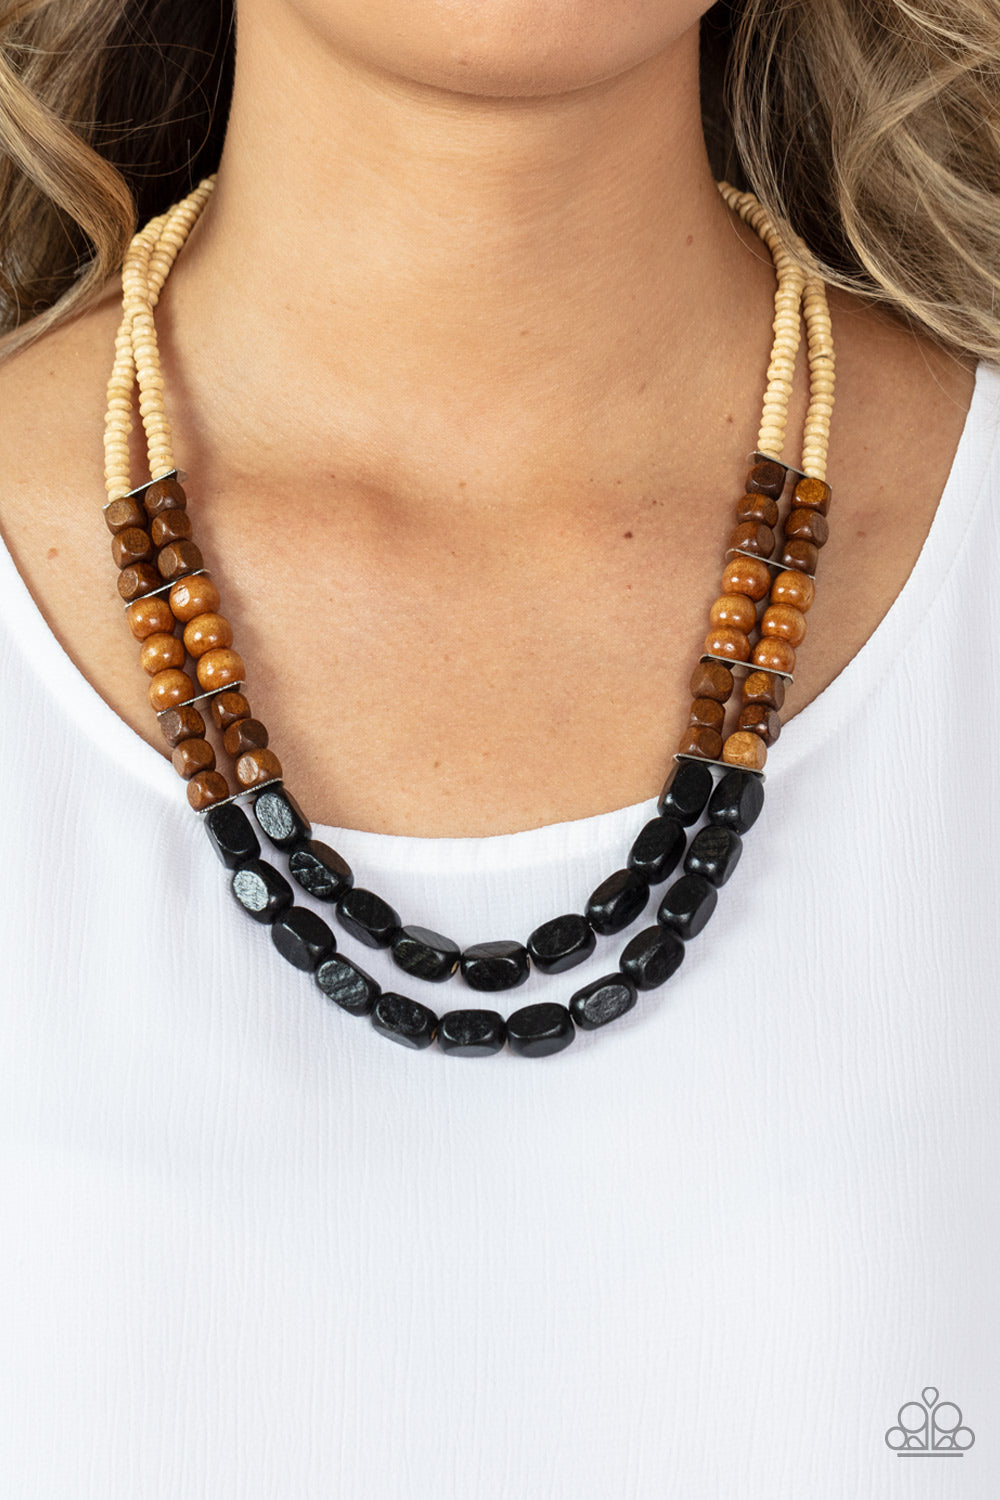 Bermuda Bellhop Black Wooden Necklace - Paparazzi Accessories  Varying in shape, size, and color, an earthy collection of white, brown, and black wooden beads are threaded along invisible wires across the chest, creating tropical inspired layers. Features an adjustable clasp closure.  Sold as one individual necklace. Includes one pair of matching earrings.